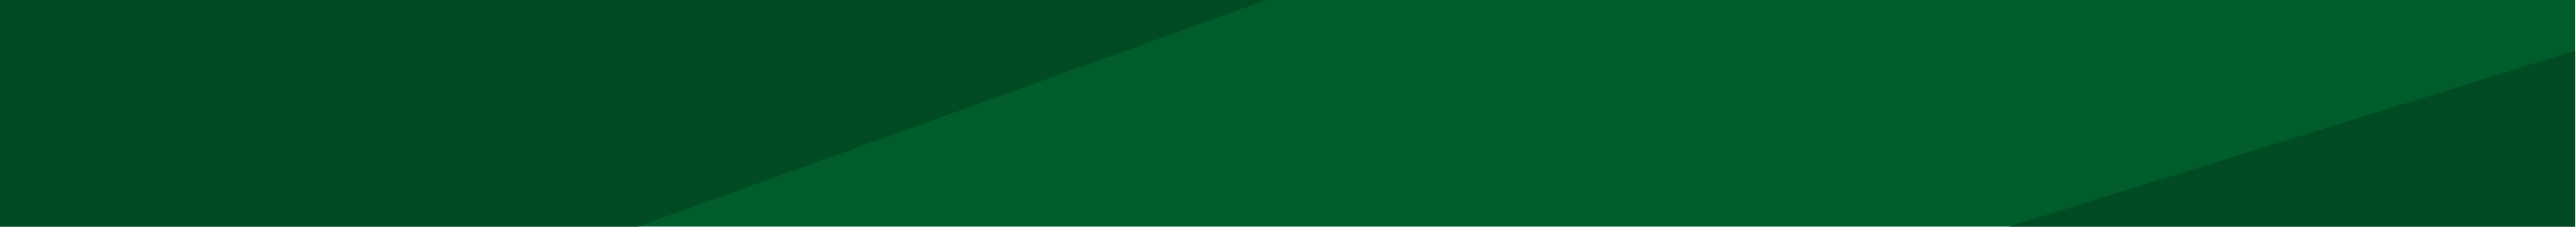 a green background with a diagonal stripe in the middle